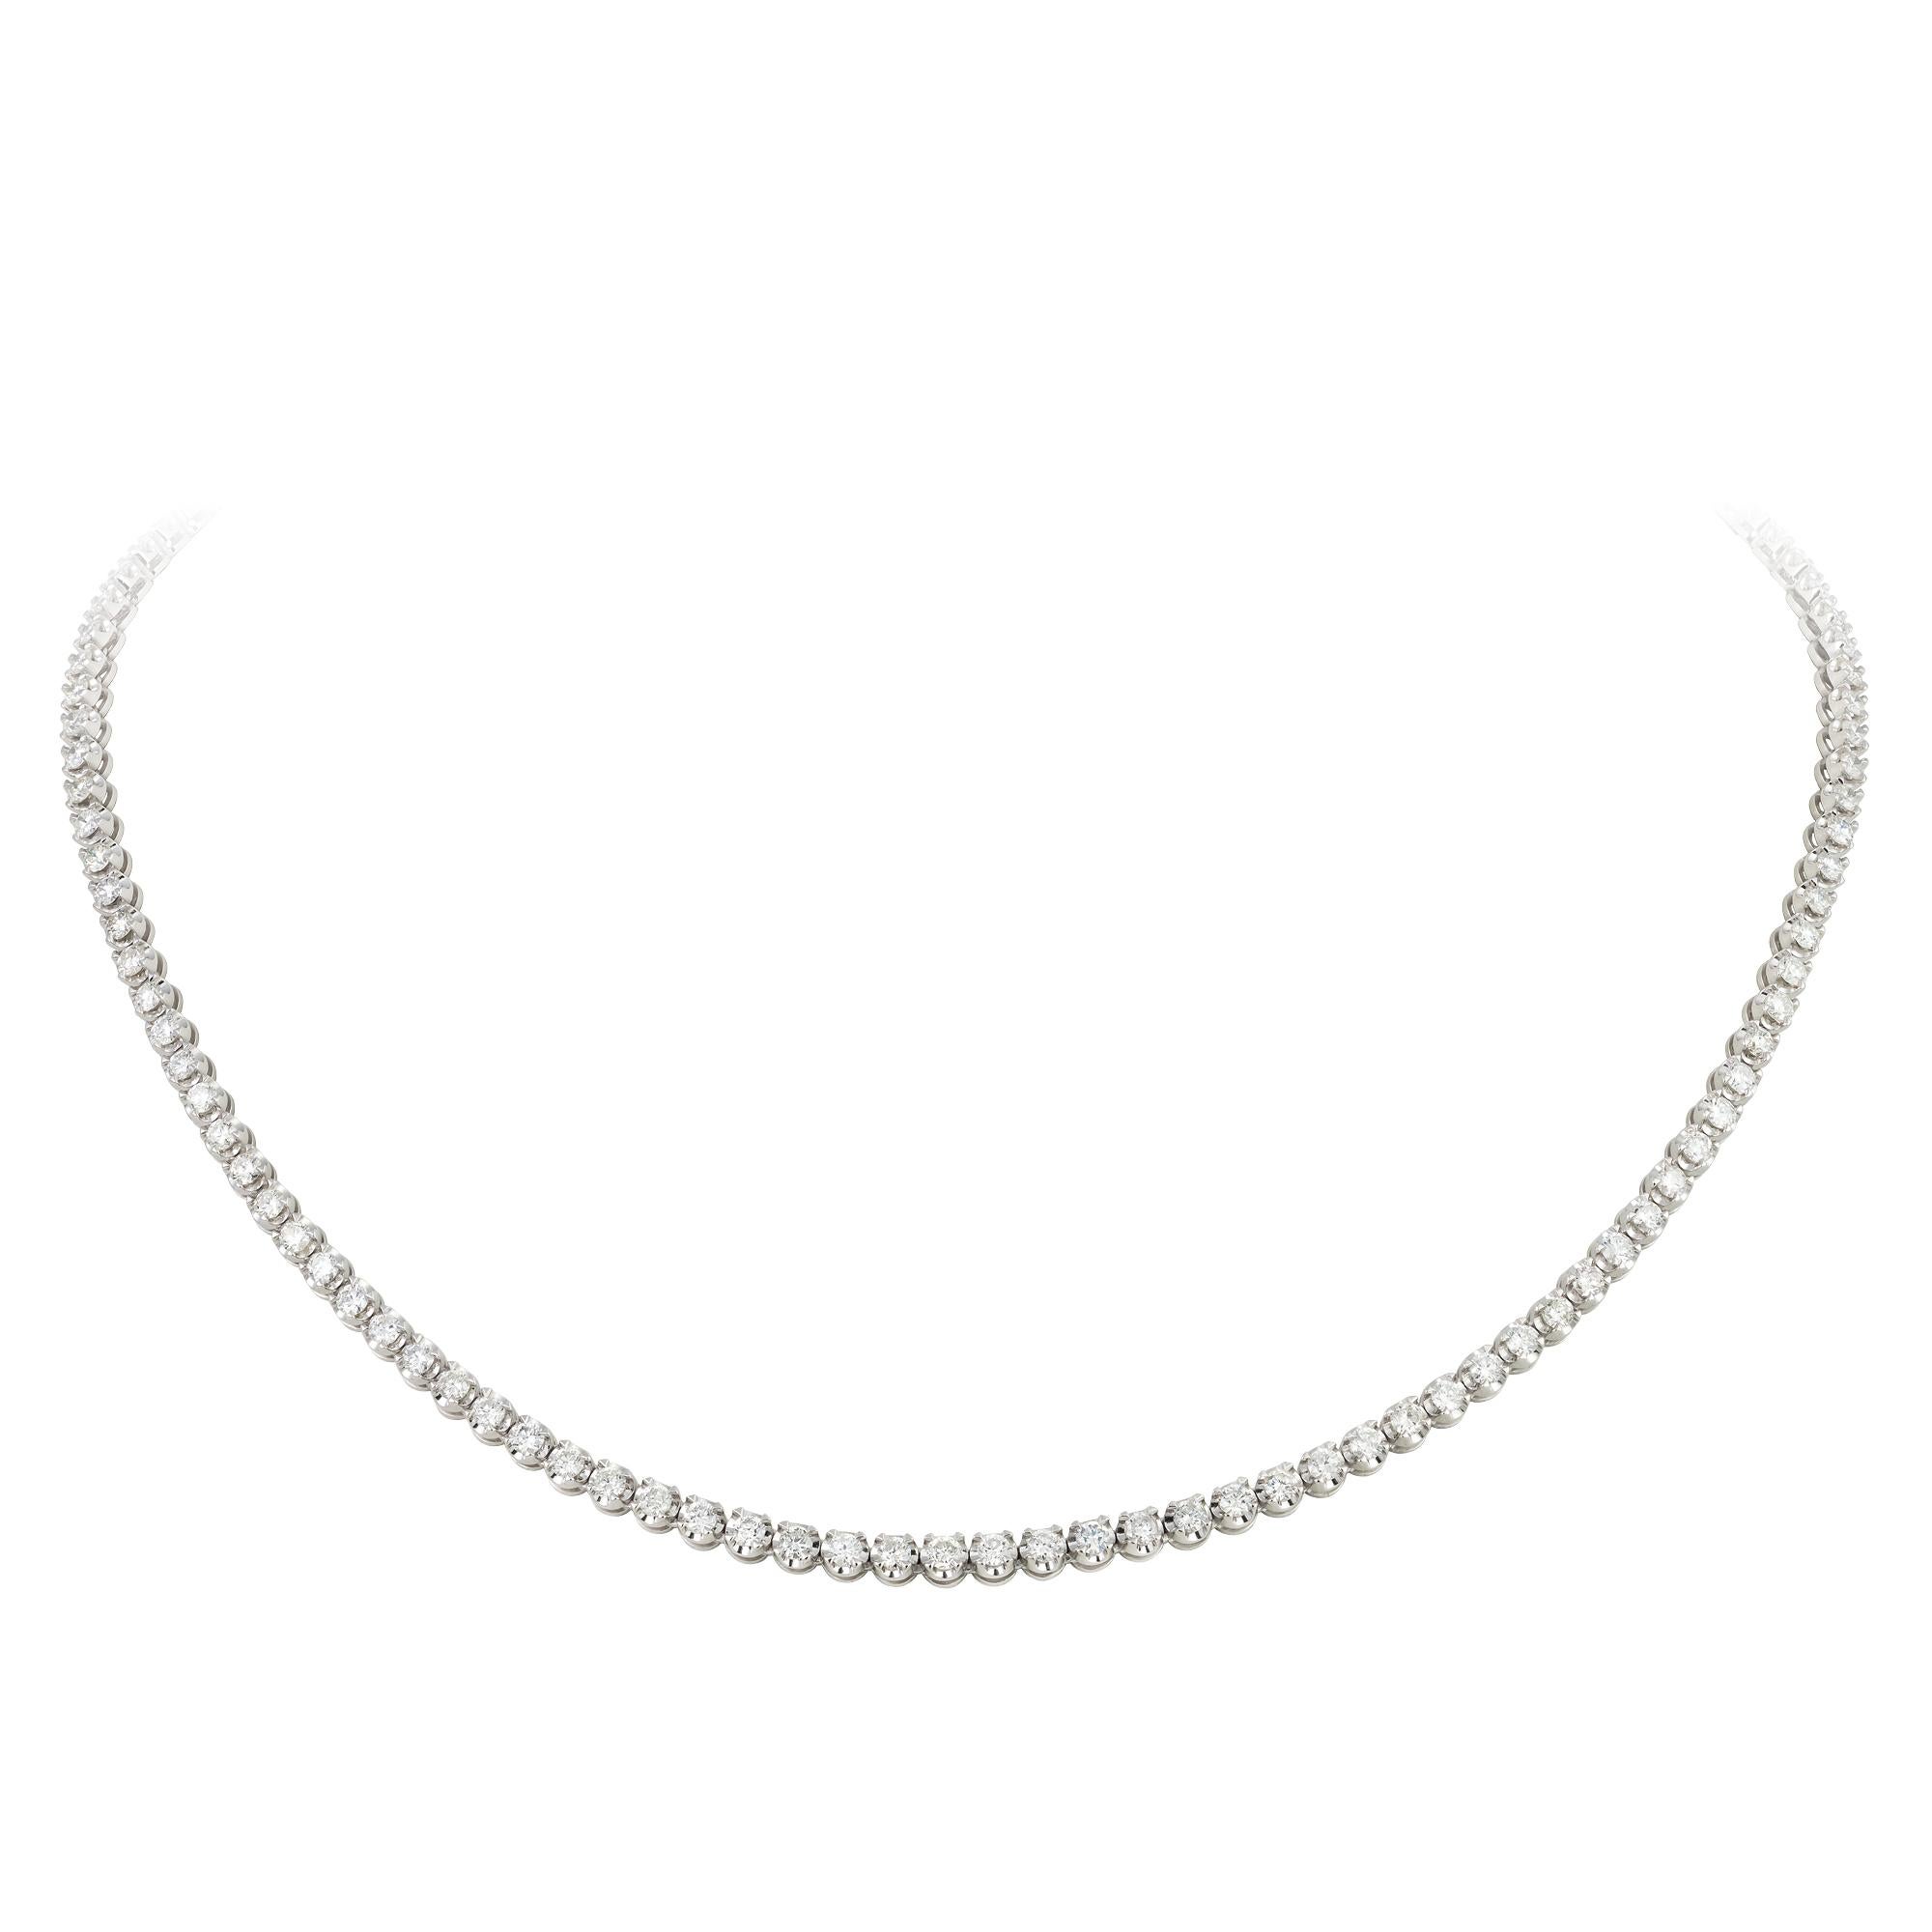 Modern Unique White Gold 18K Necklace Diamond for Her For Sale